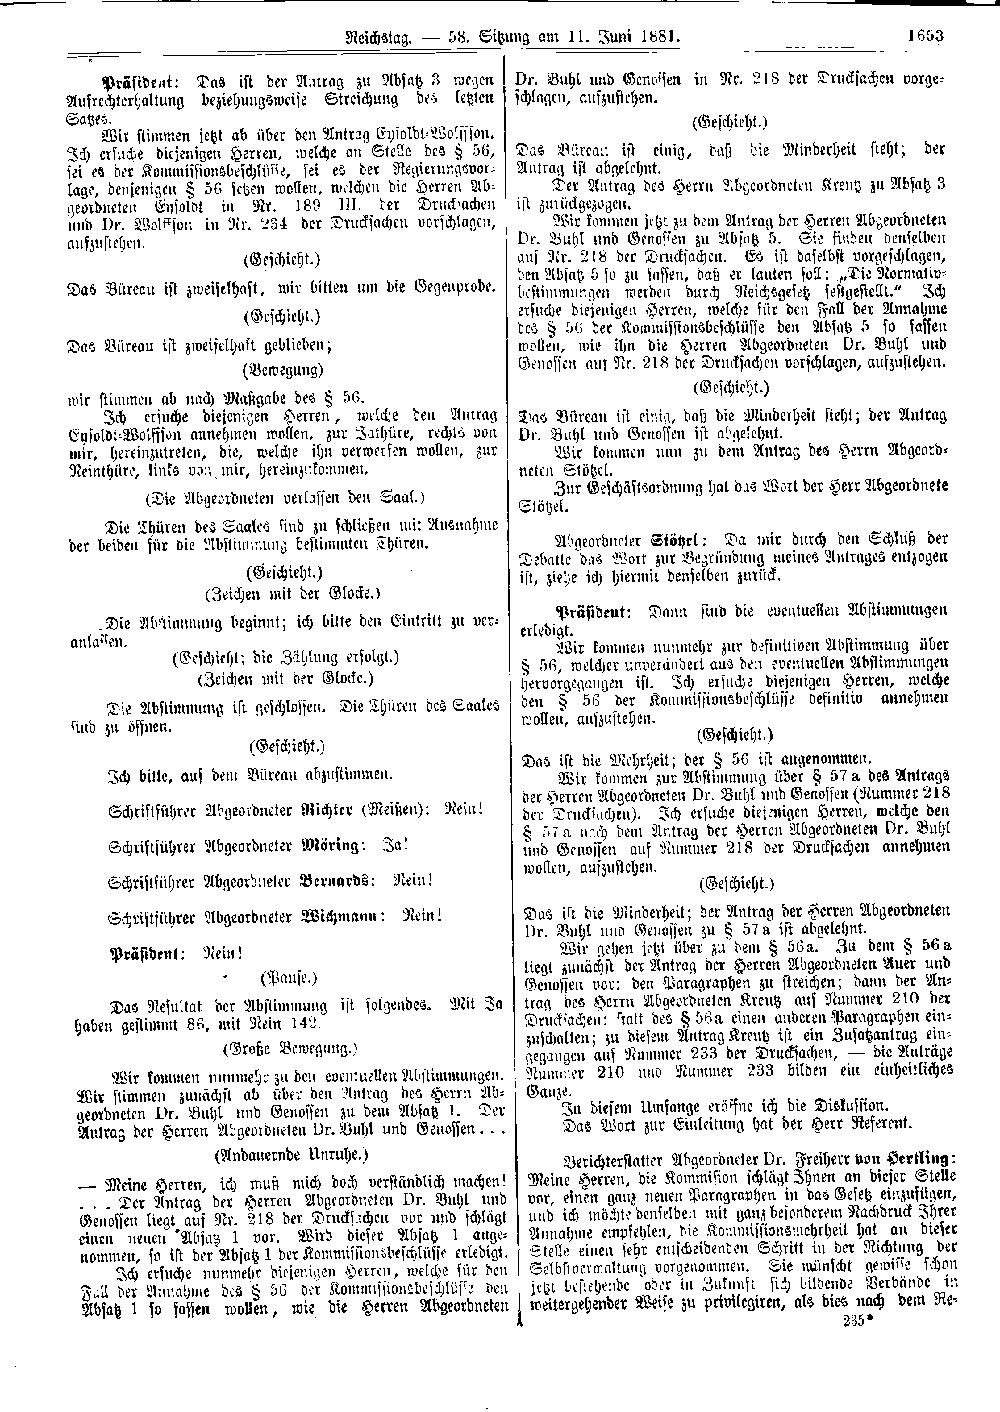 Scan of page 1653